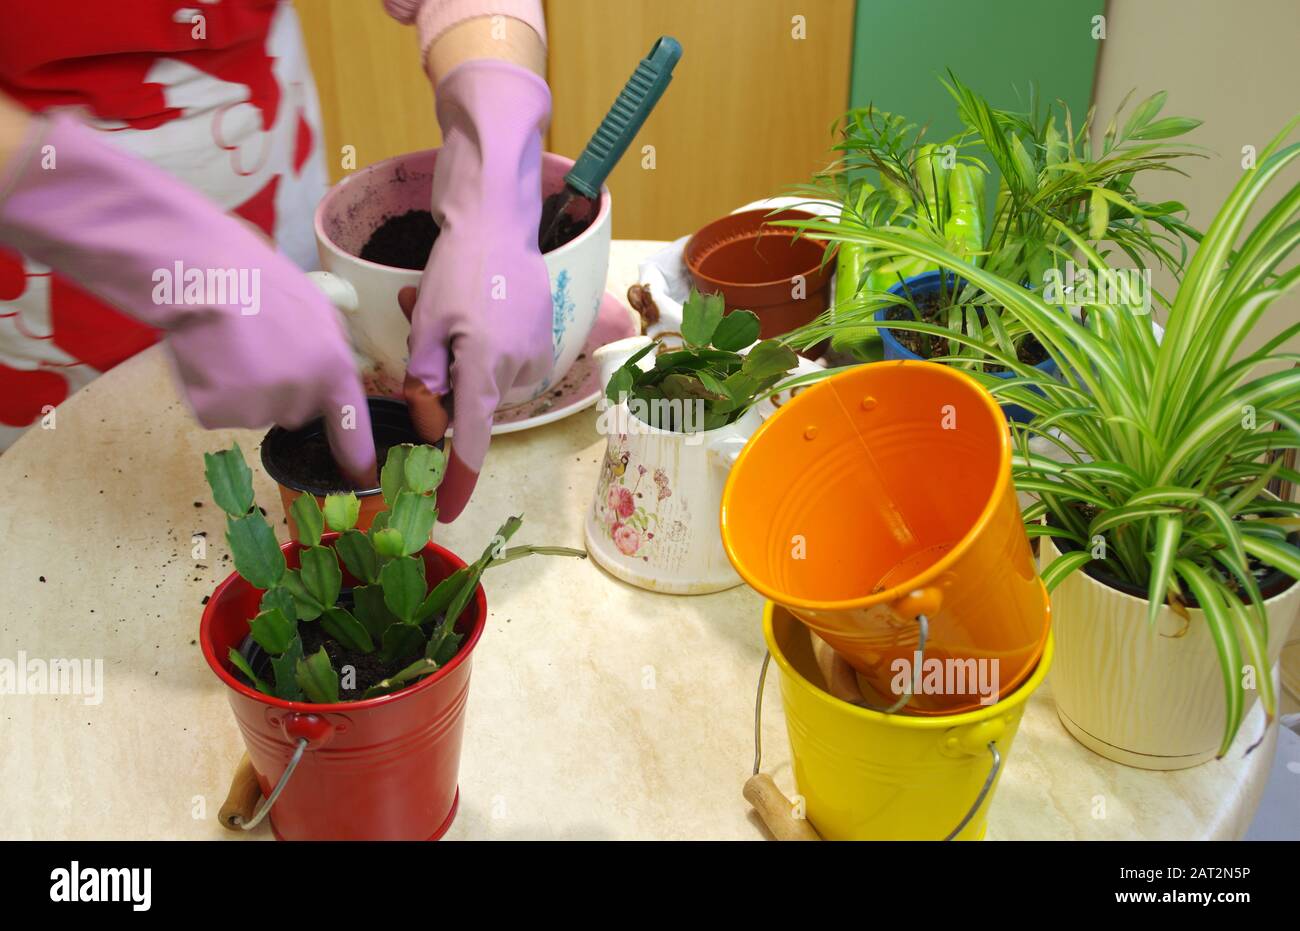 Home gardening. A woman planting potted plants. Tools, gloves and flowers on the table. House garden. Stock Photo